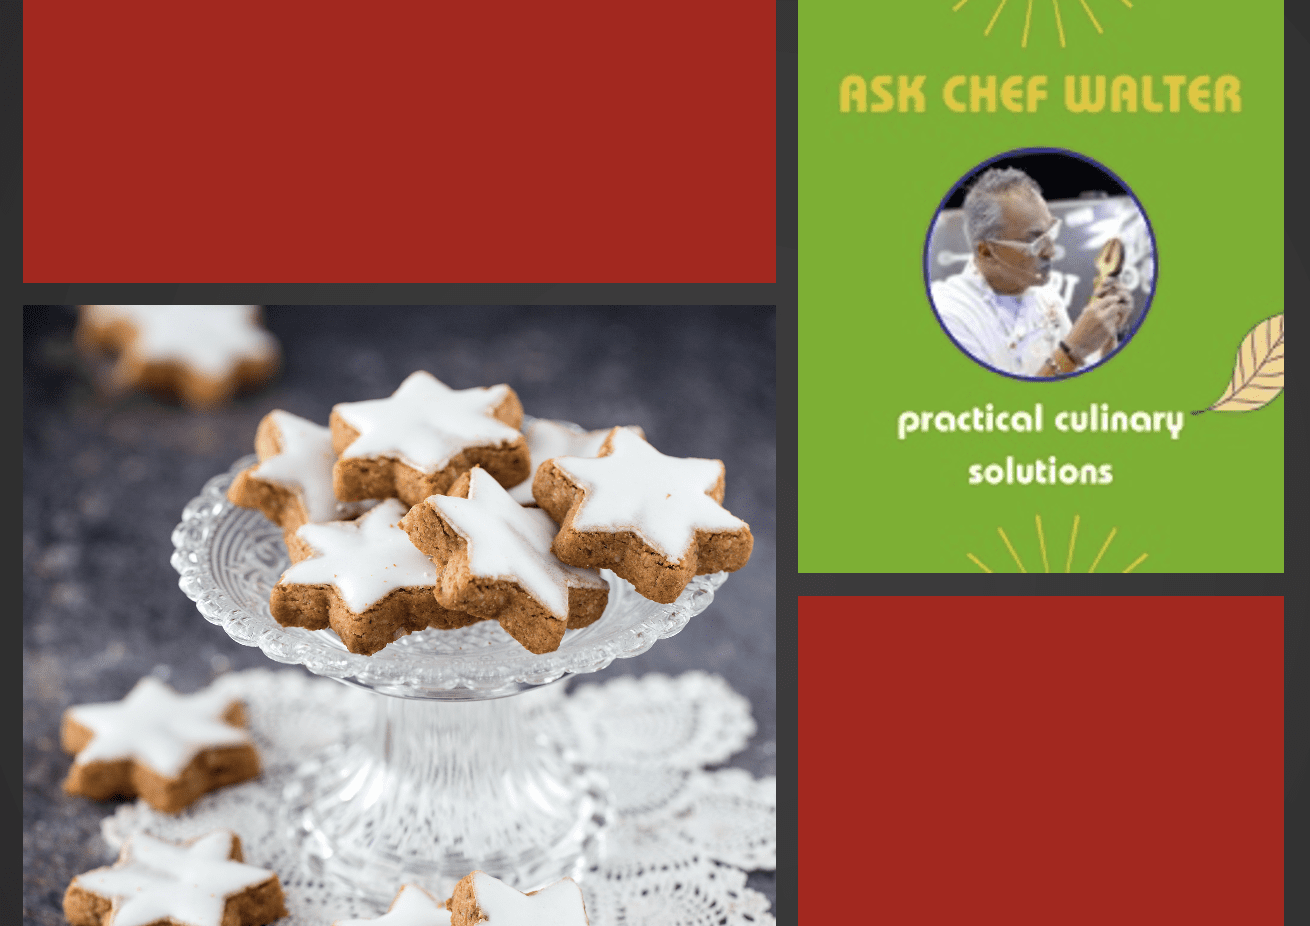 A festive photo of Christmas cookies on a plate, inviting viewers to "ask Chef Walter" for his secret recipes.